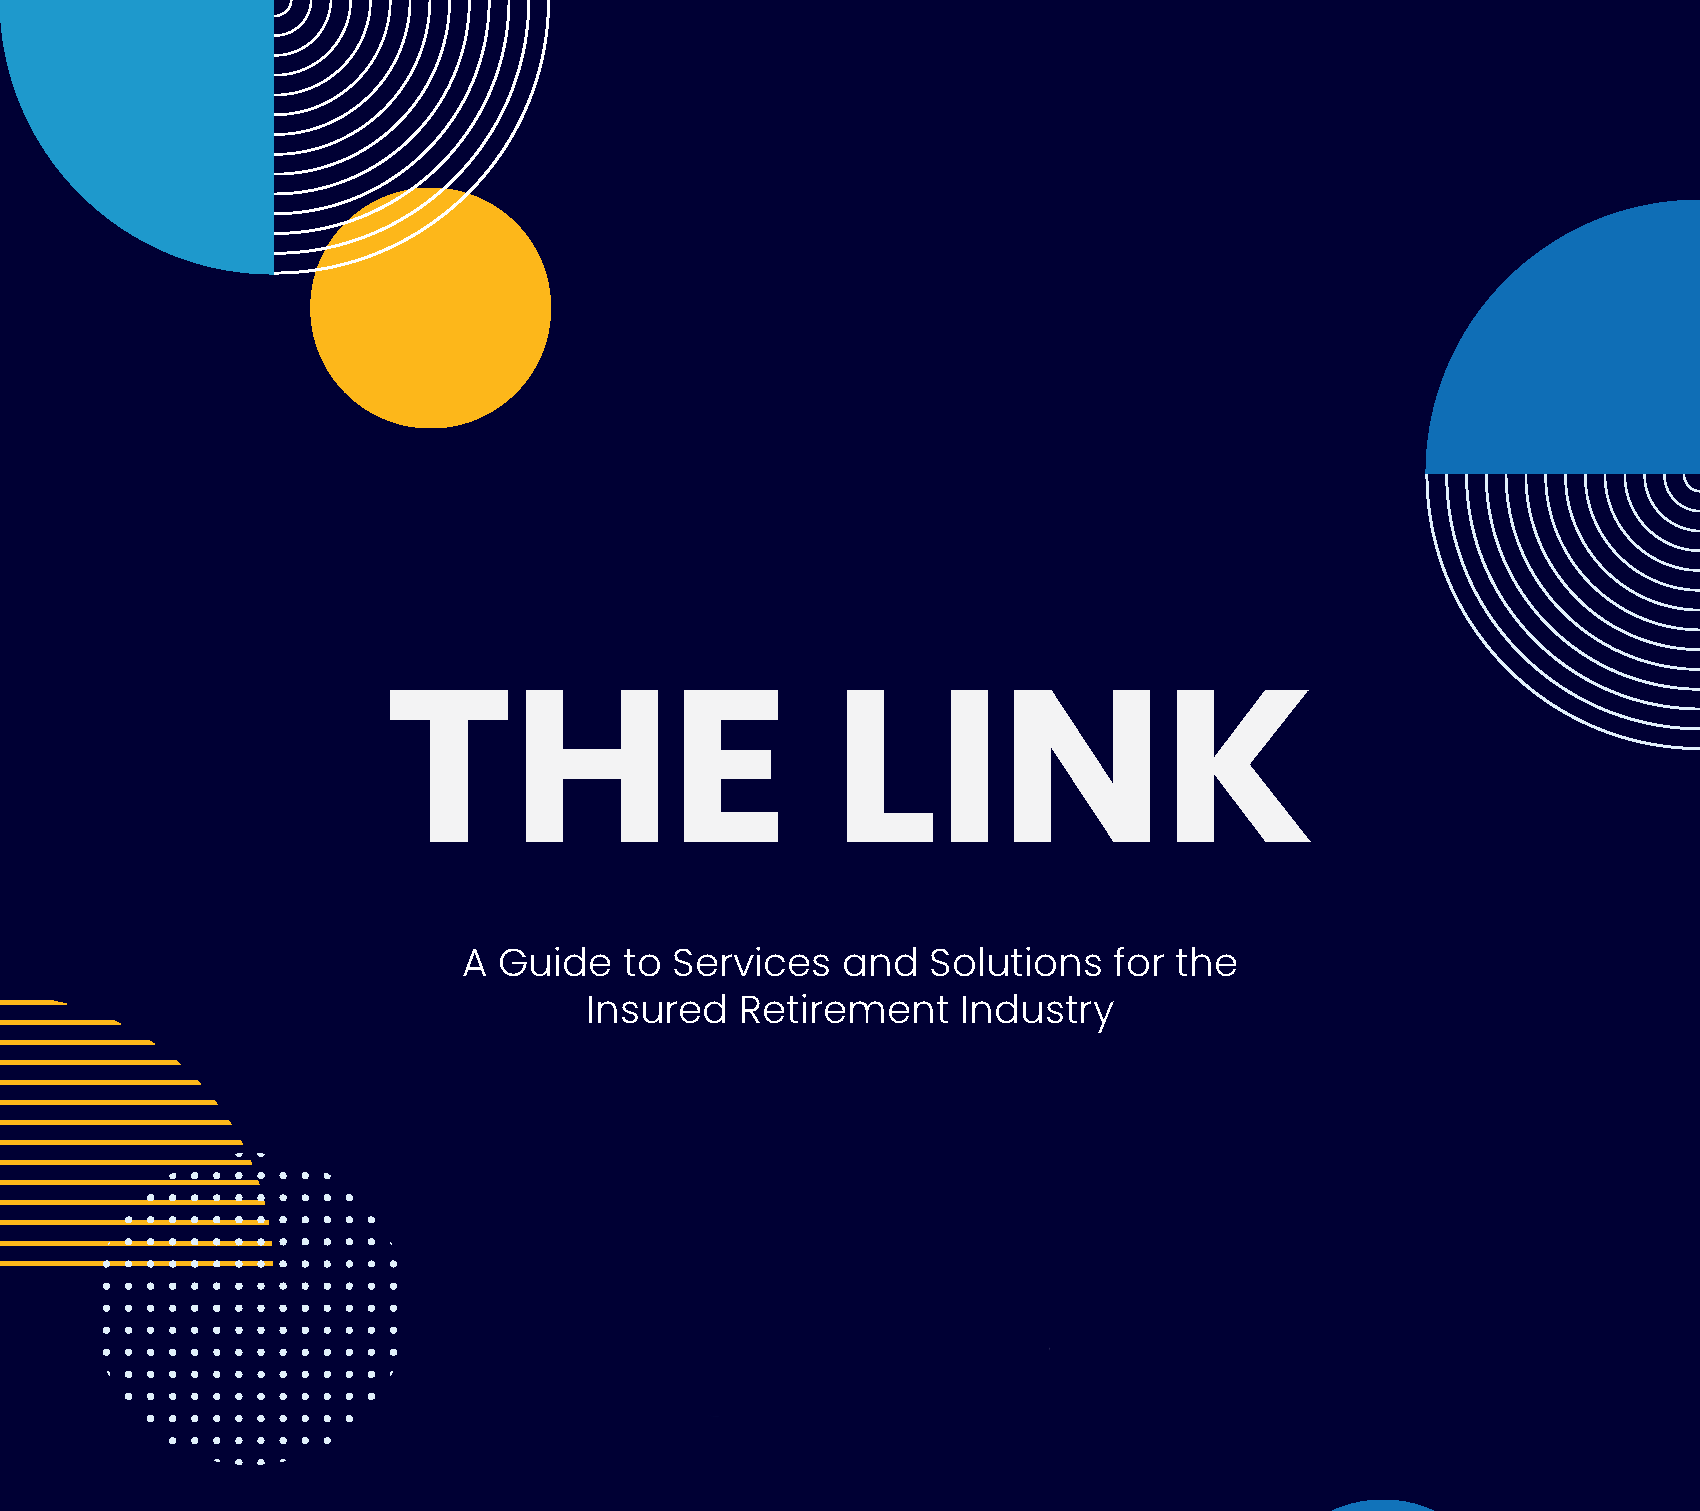 The Link Logo - A Guide to Services and Solutions for the Insured Retirement Industry